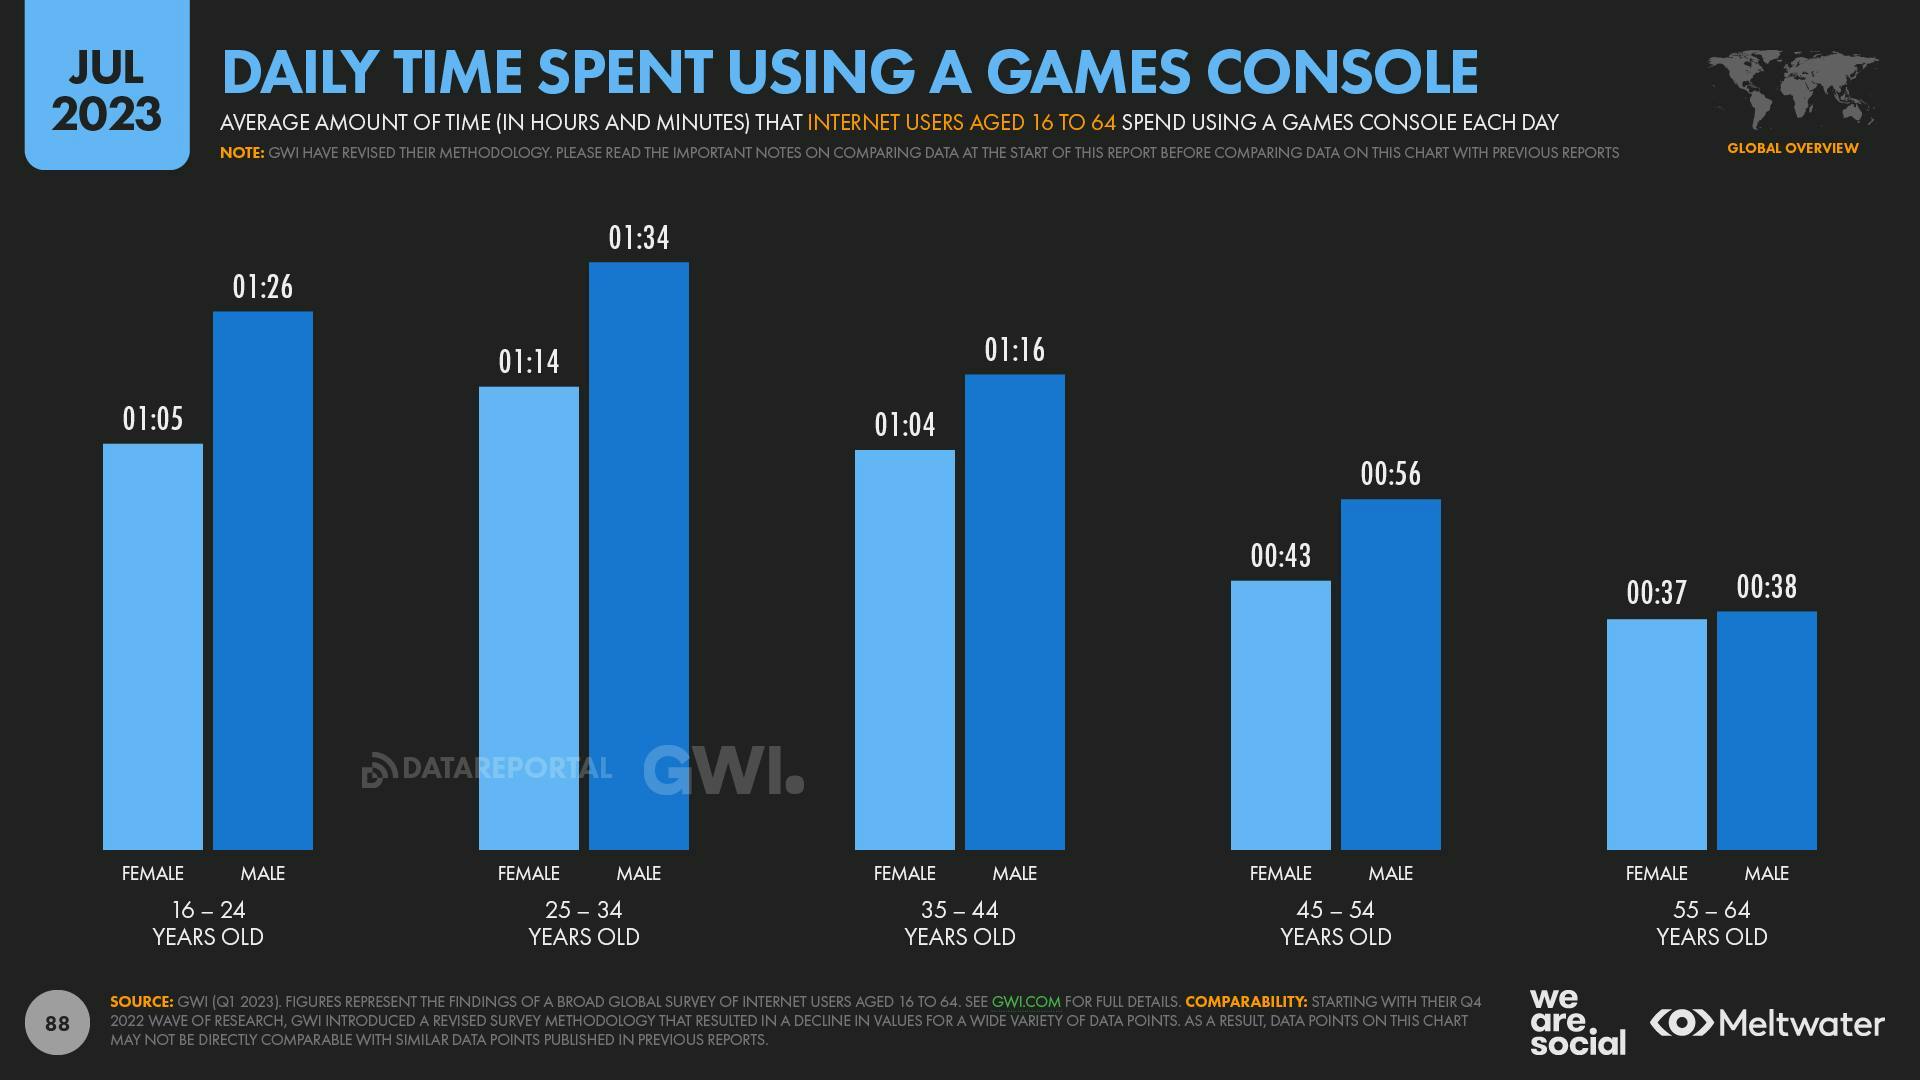 Daily time spent using a games console